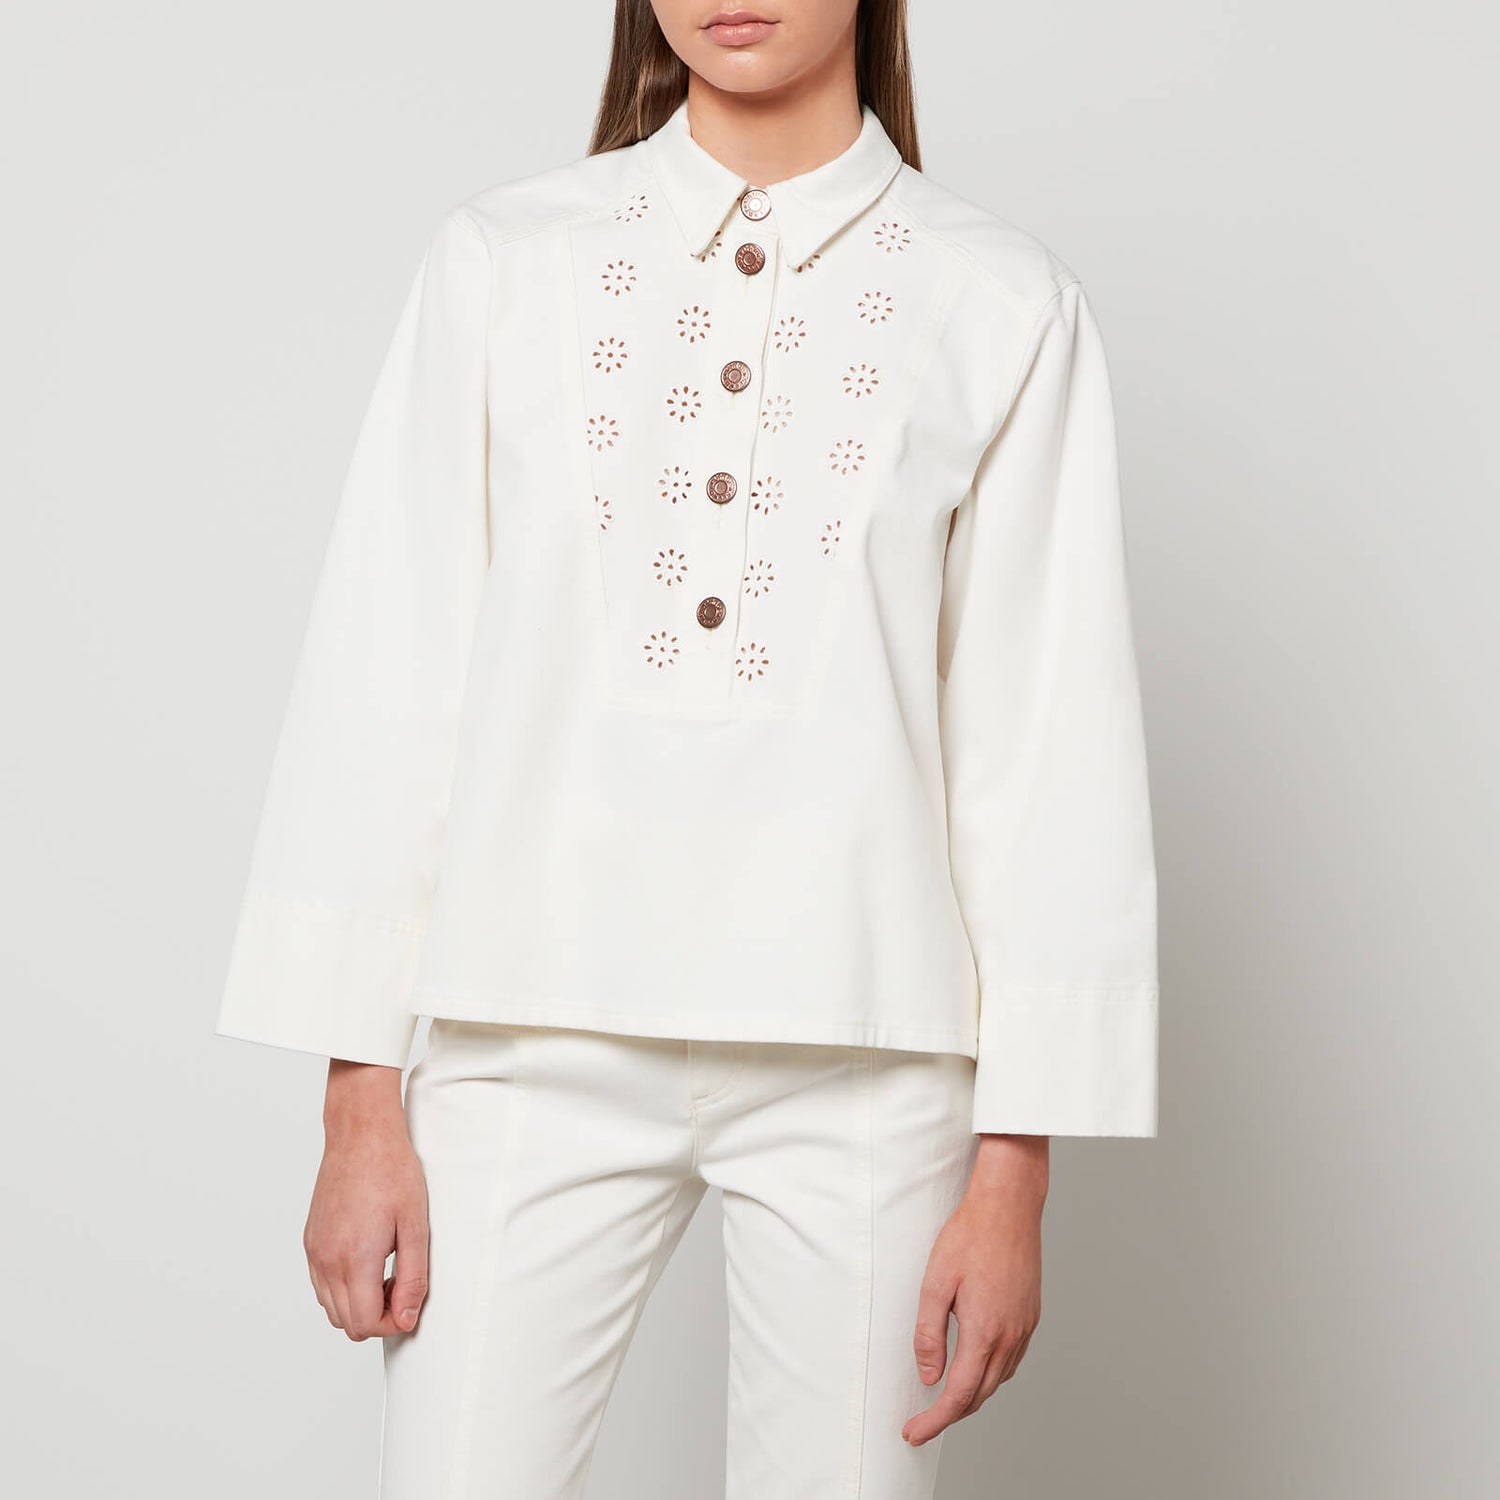 See By Chloé Women's Broderie Anglaise Denim Jacket - White - EU 38/UK 10